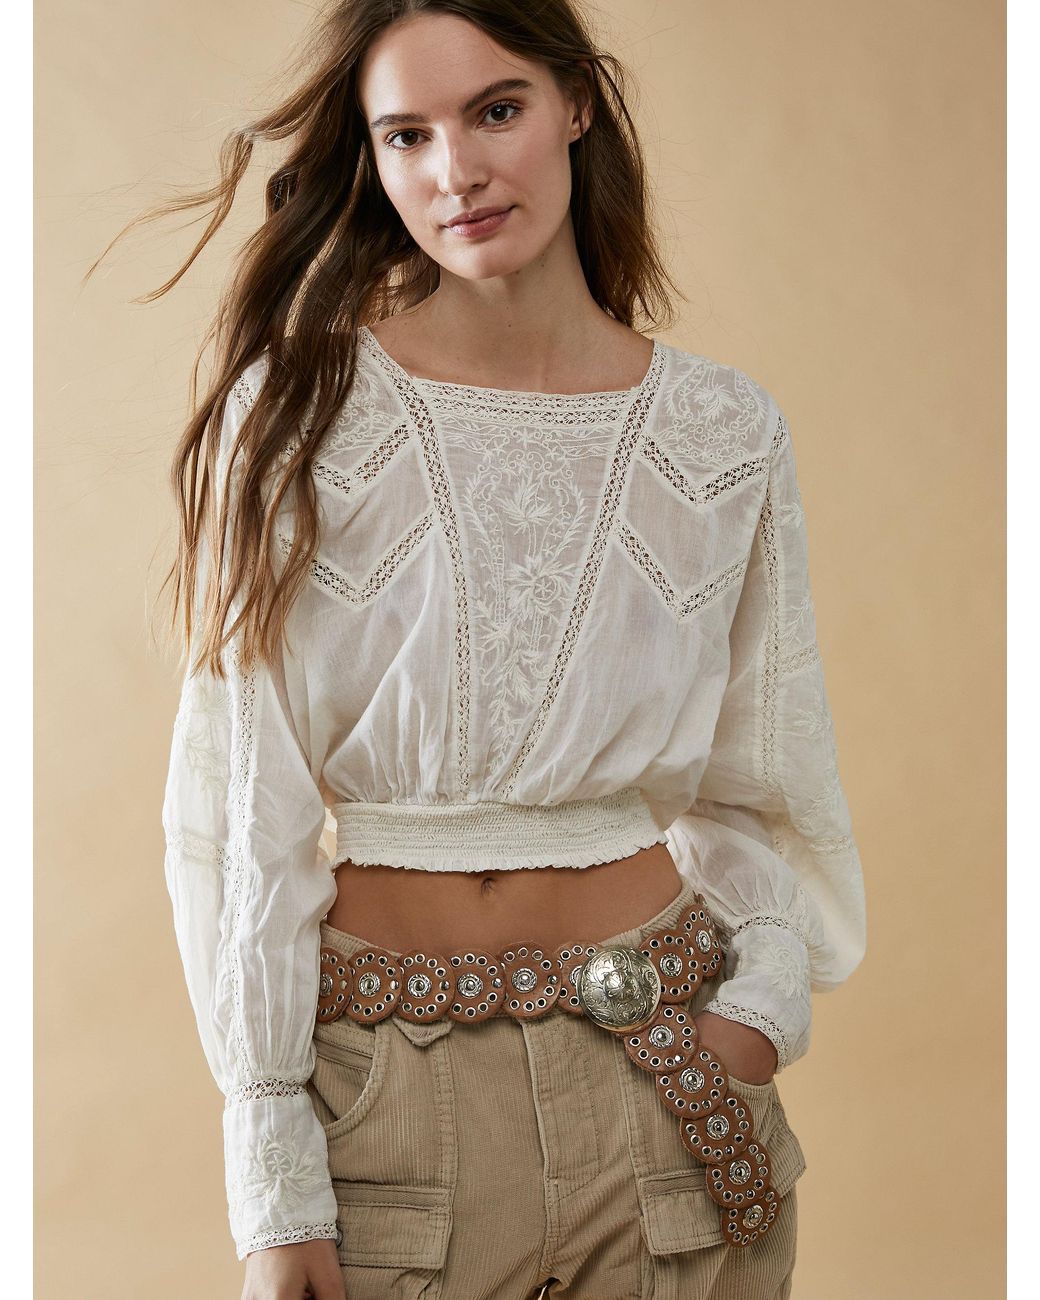 Free People Lucky Me Lace Top in Natural